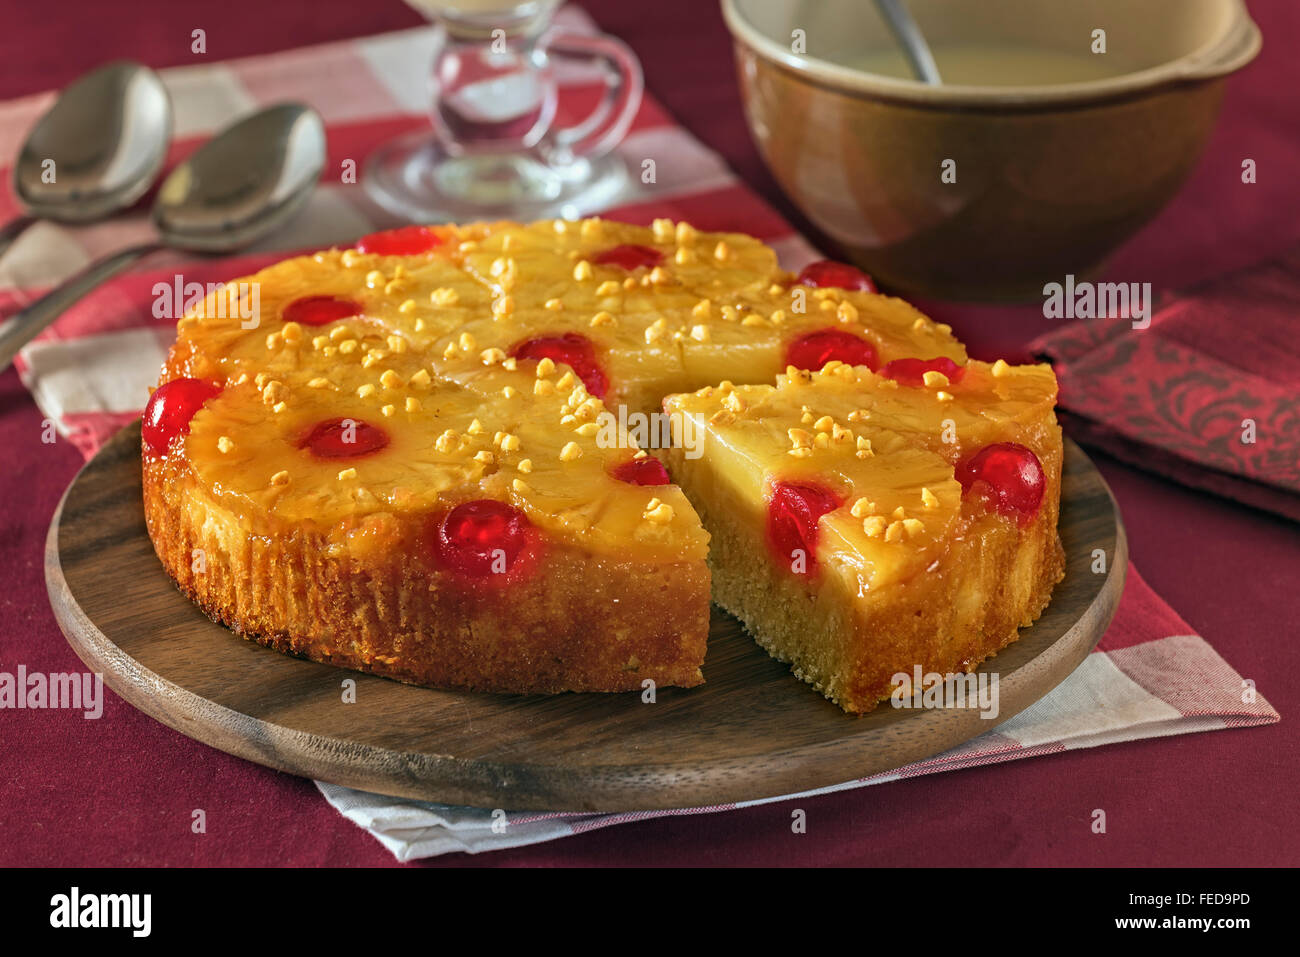 Pineapple upside down cake Banque D'Images